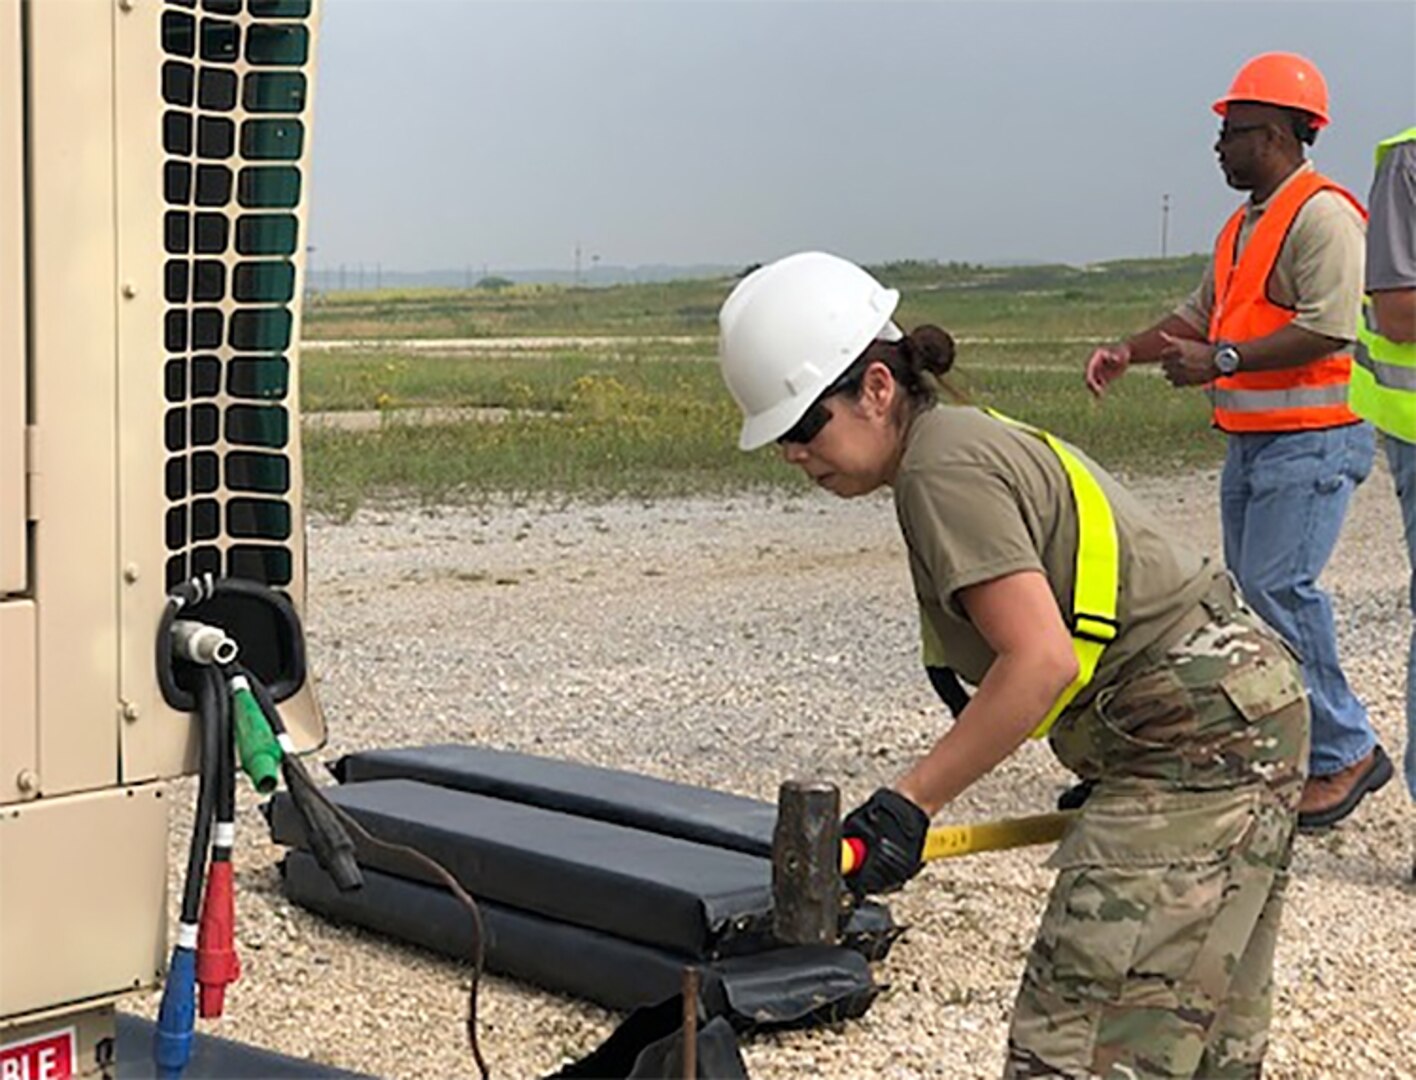 U.S. Army Sgt. Diana Palomino, of Disposition Services Unit 1 out of Joint Base Lewis-McChord, hammers in a stabilization stake while preparing a mobile property disposal site at Camp Bondsteel in Kosovo.